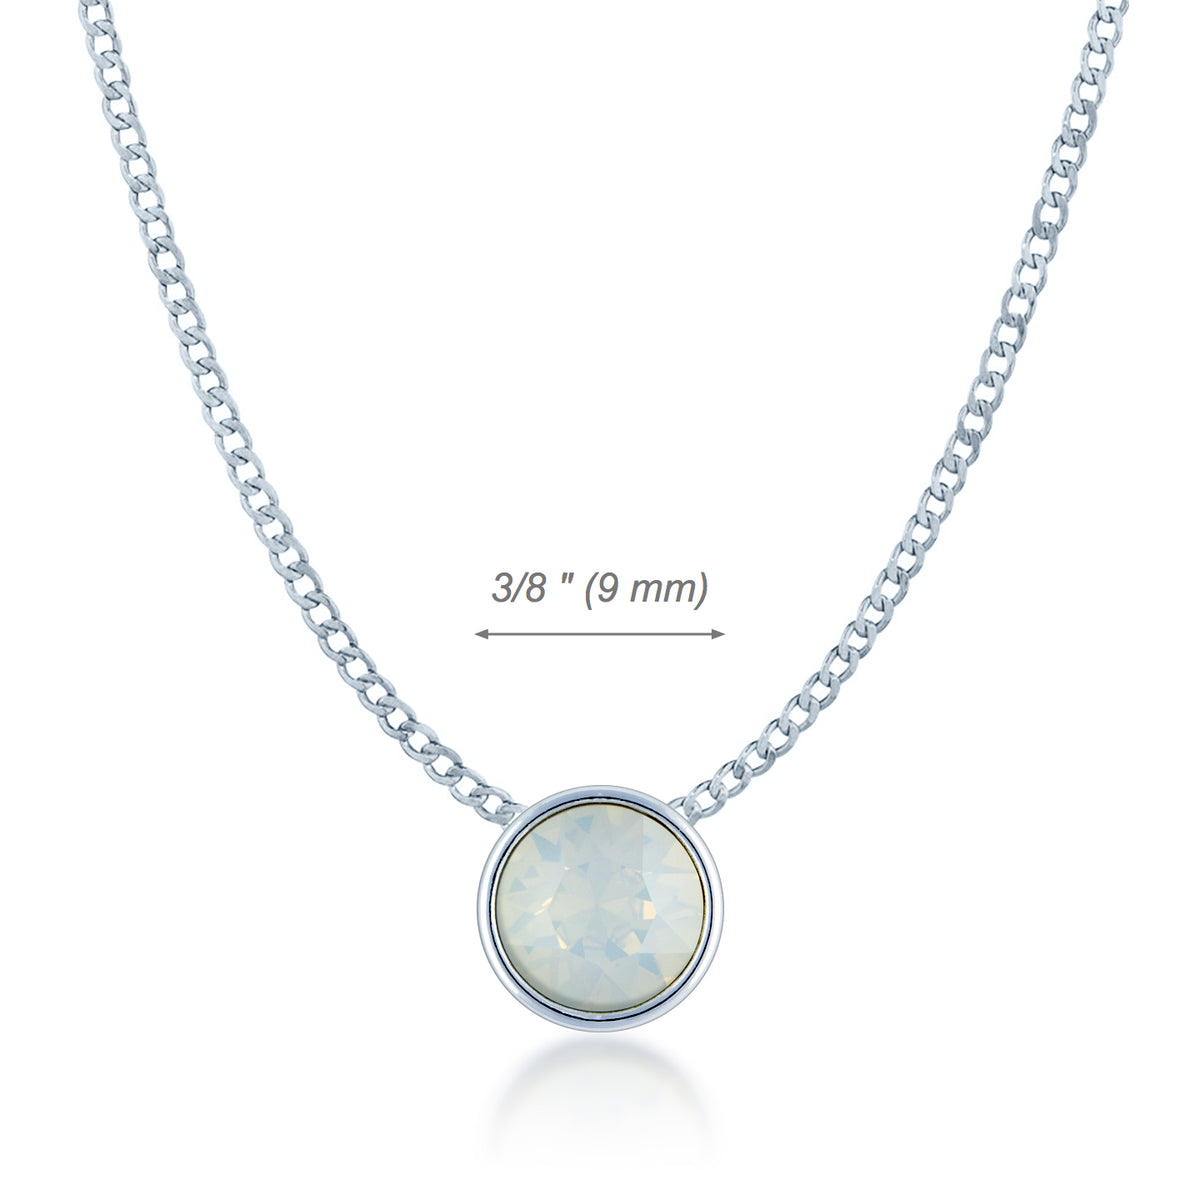 Harley Small Pendant Necklace with Ivory White Round Opals from Swarovski Silver Toned Rhodium Plated - Ed Heart